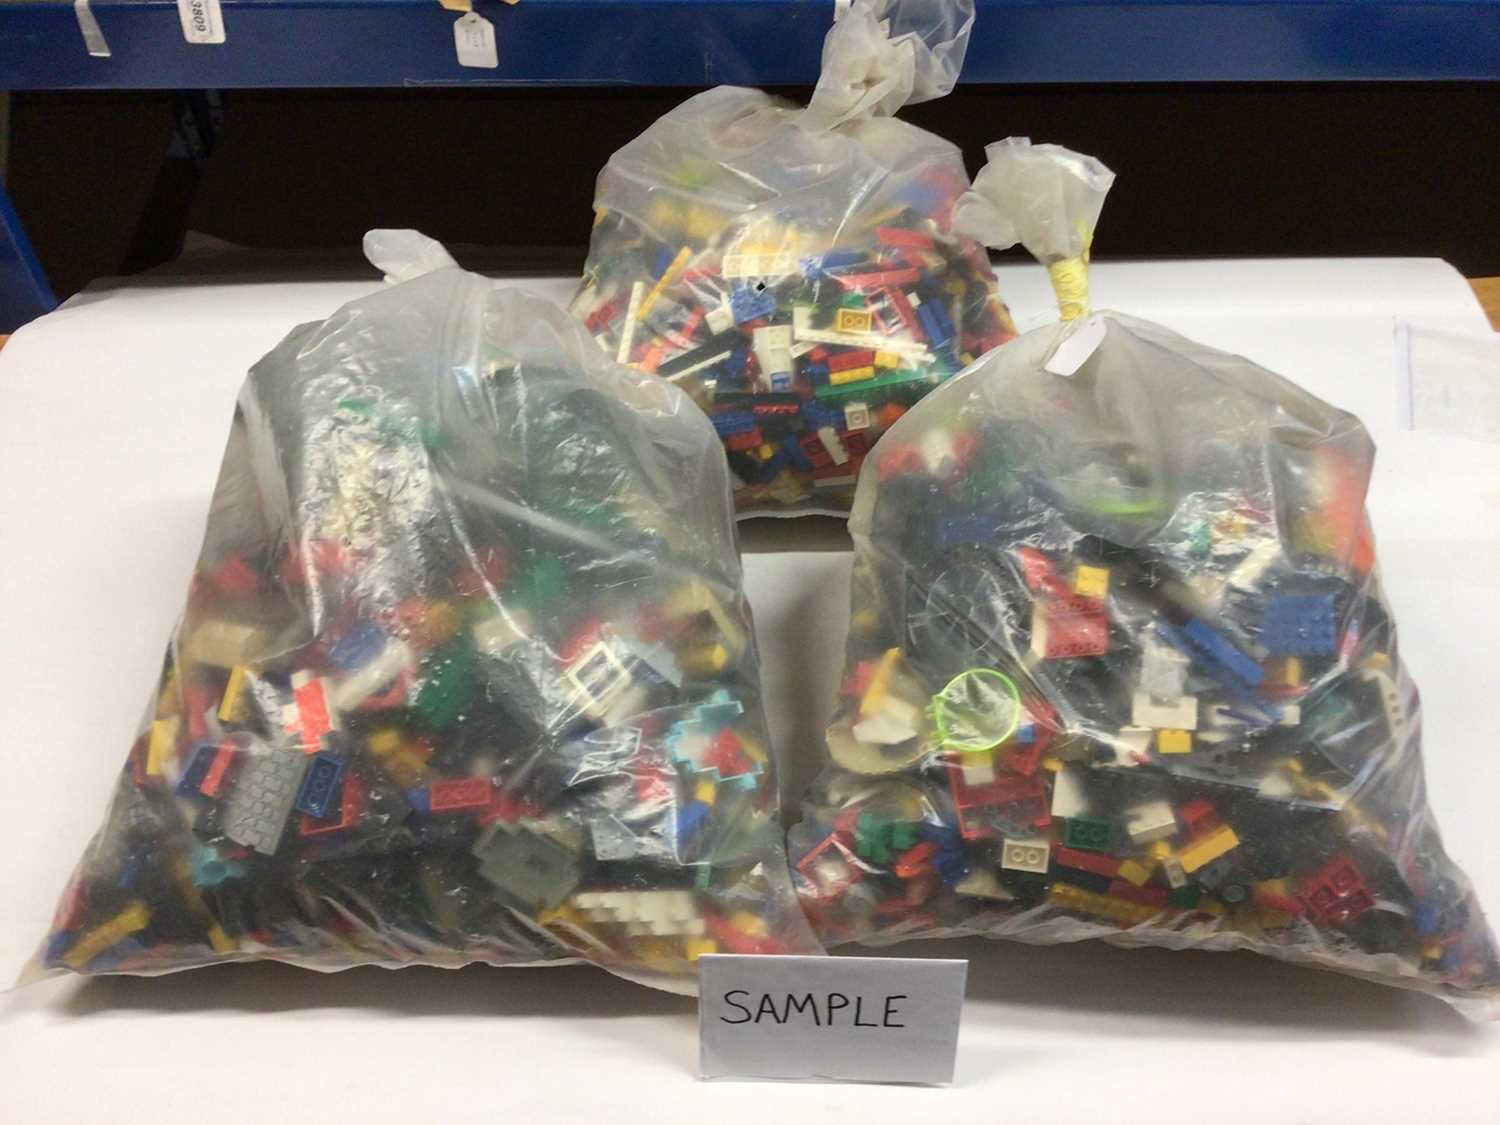 Lot 89 - Three bags of assorted mixed Lego bricks and accessories, weighing approx 15 Kg in total